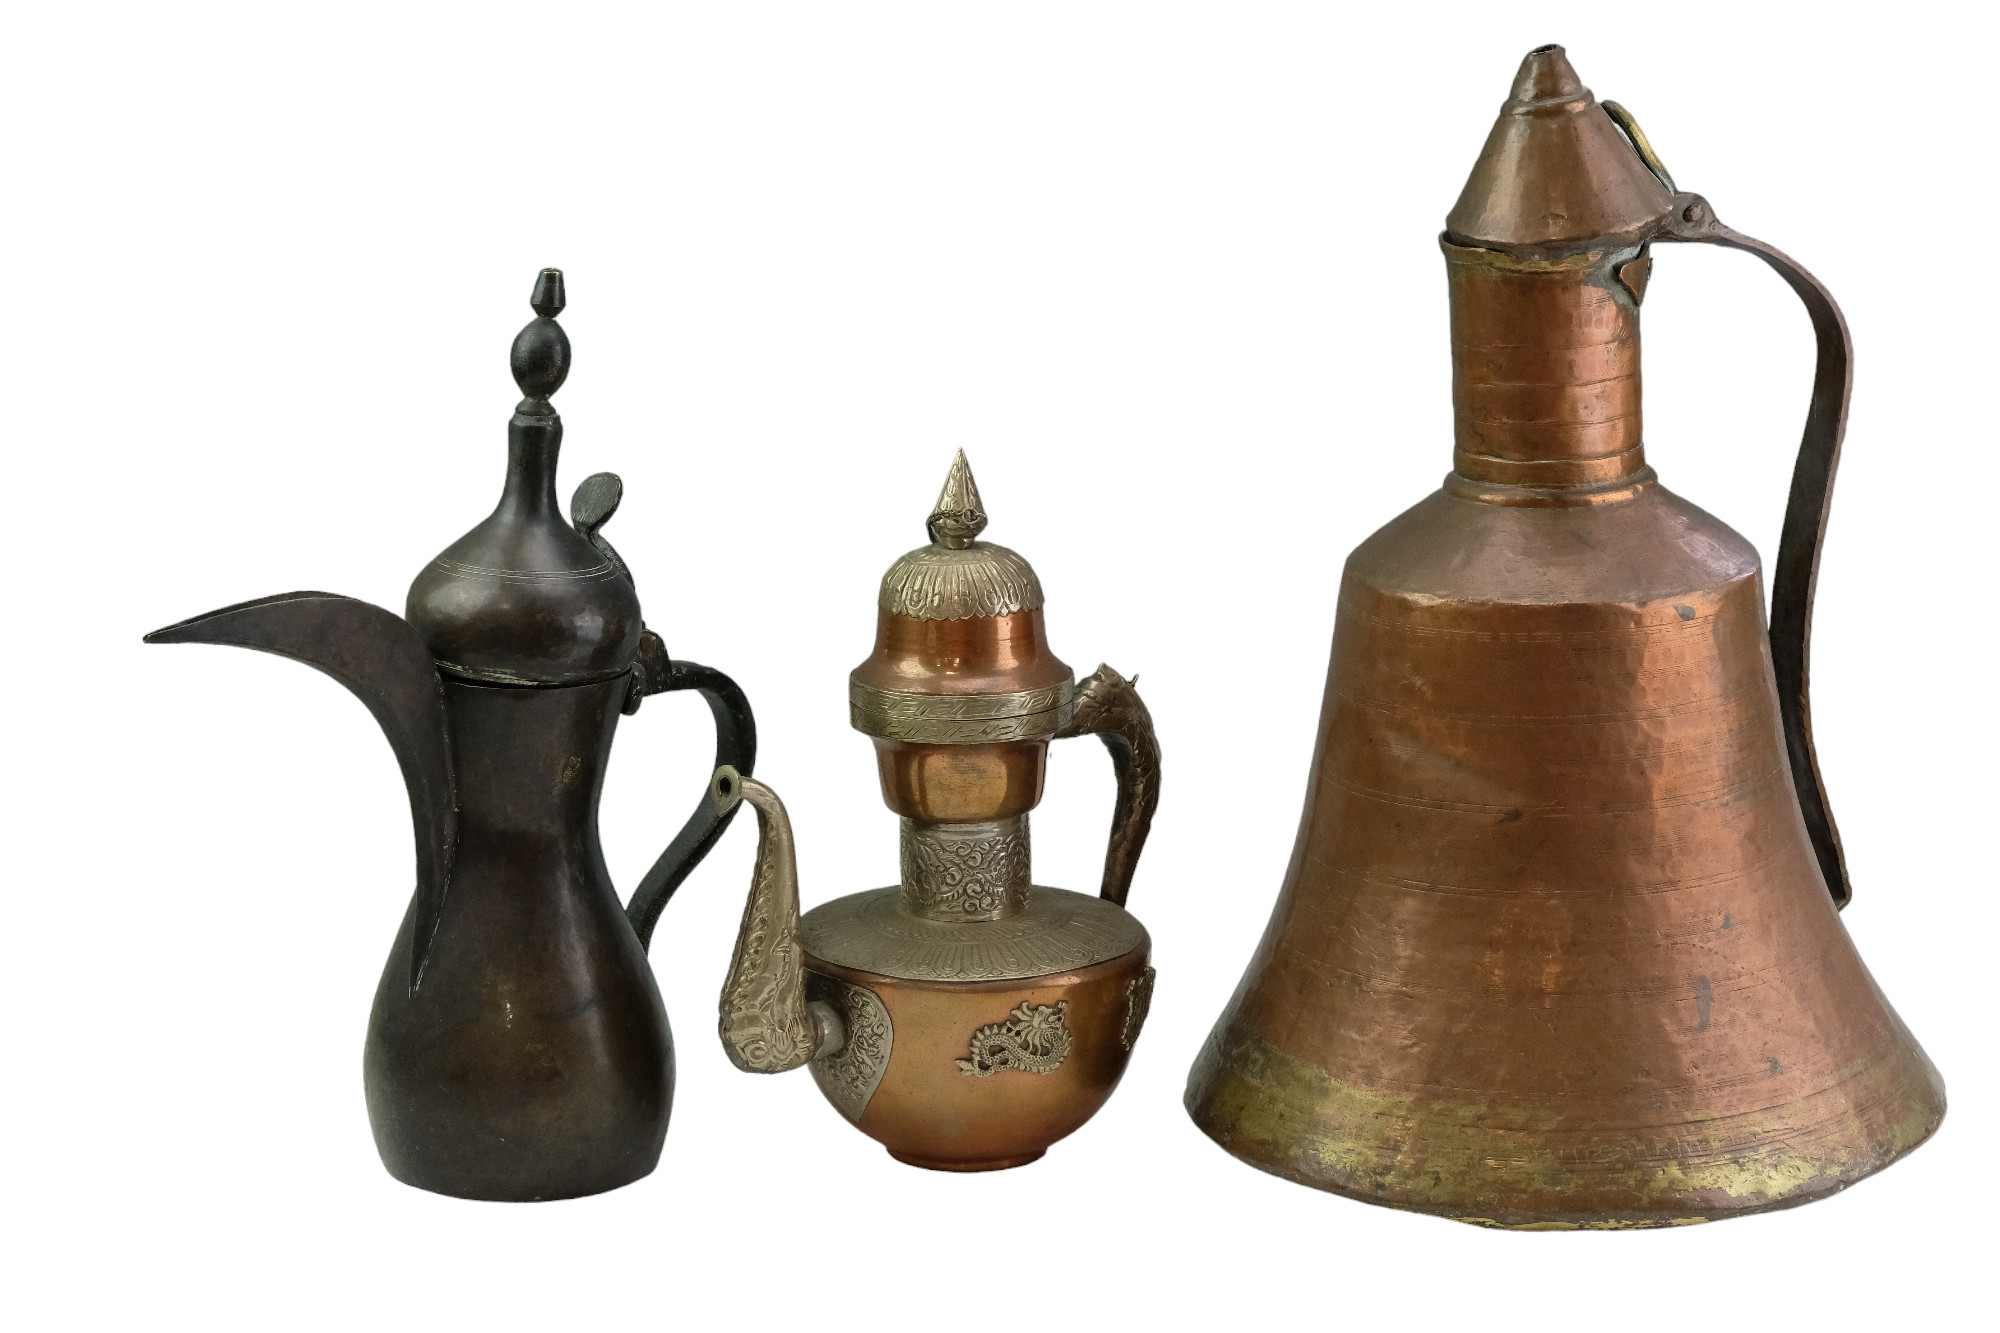 A Tibetan copper and nickel alloy tea pot together with an Islamic dallah coffee pot and one other